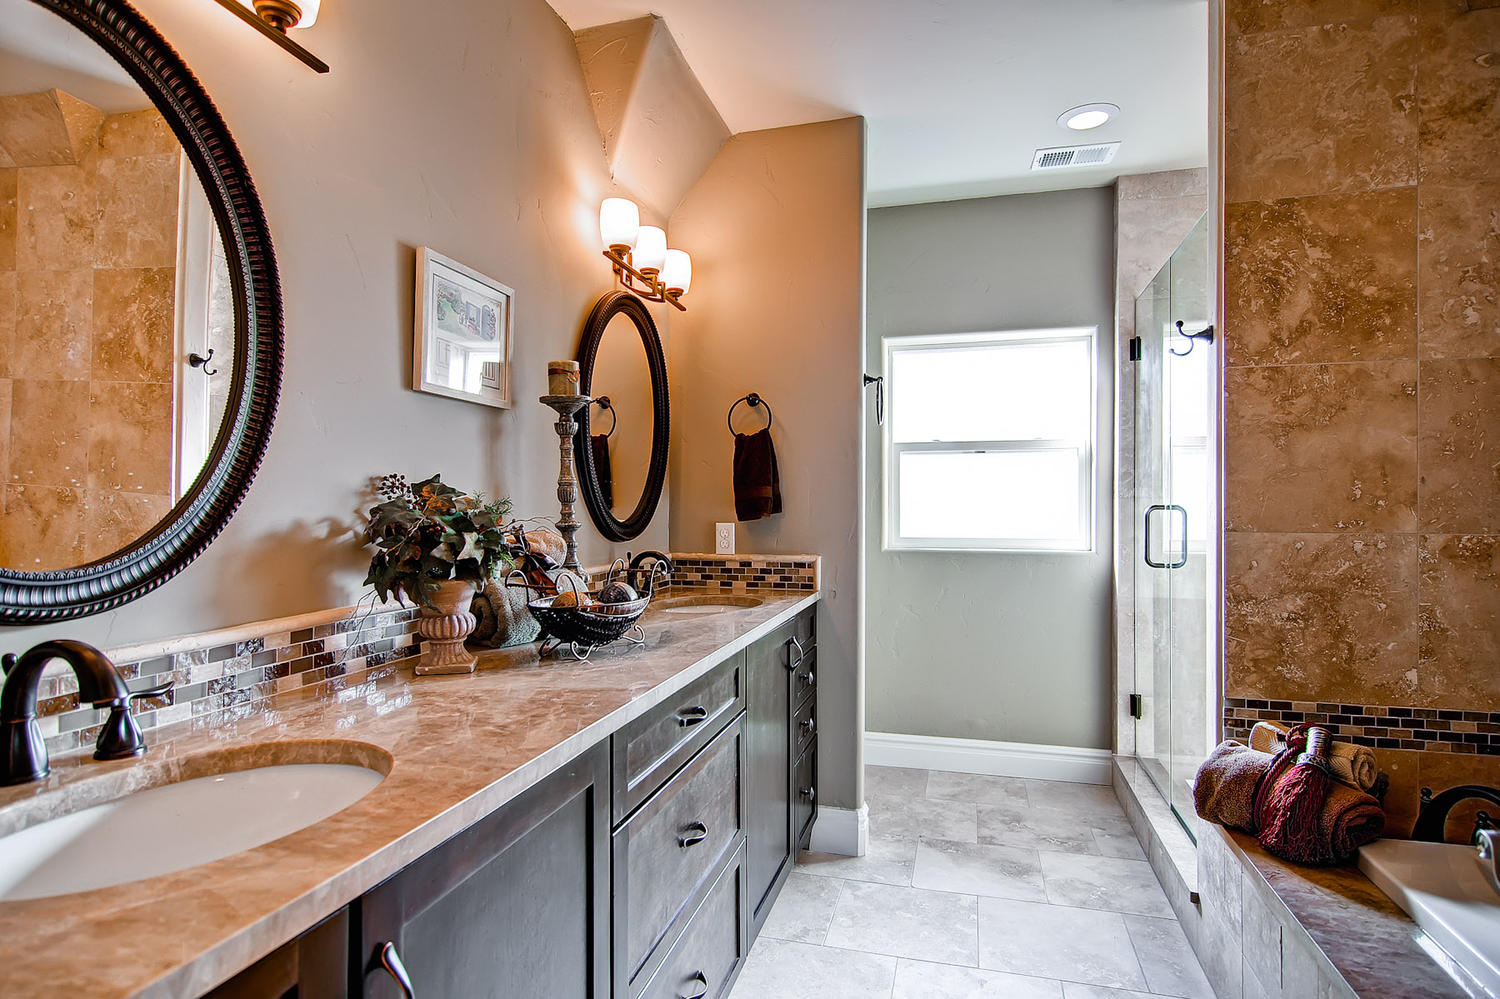 Master Bathroom residential townhouse multi-family Real estate Projects - Weins Development Group - Award-winning real estate developers in Denver, Colorado. Top #1 of Builders producing high-quality townhomes, condos, apartments, retail, & office projects